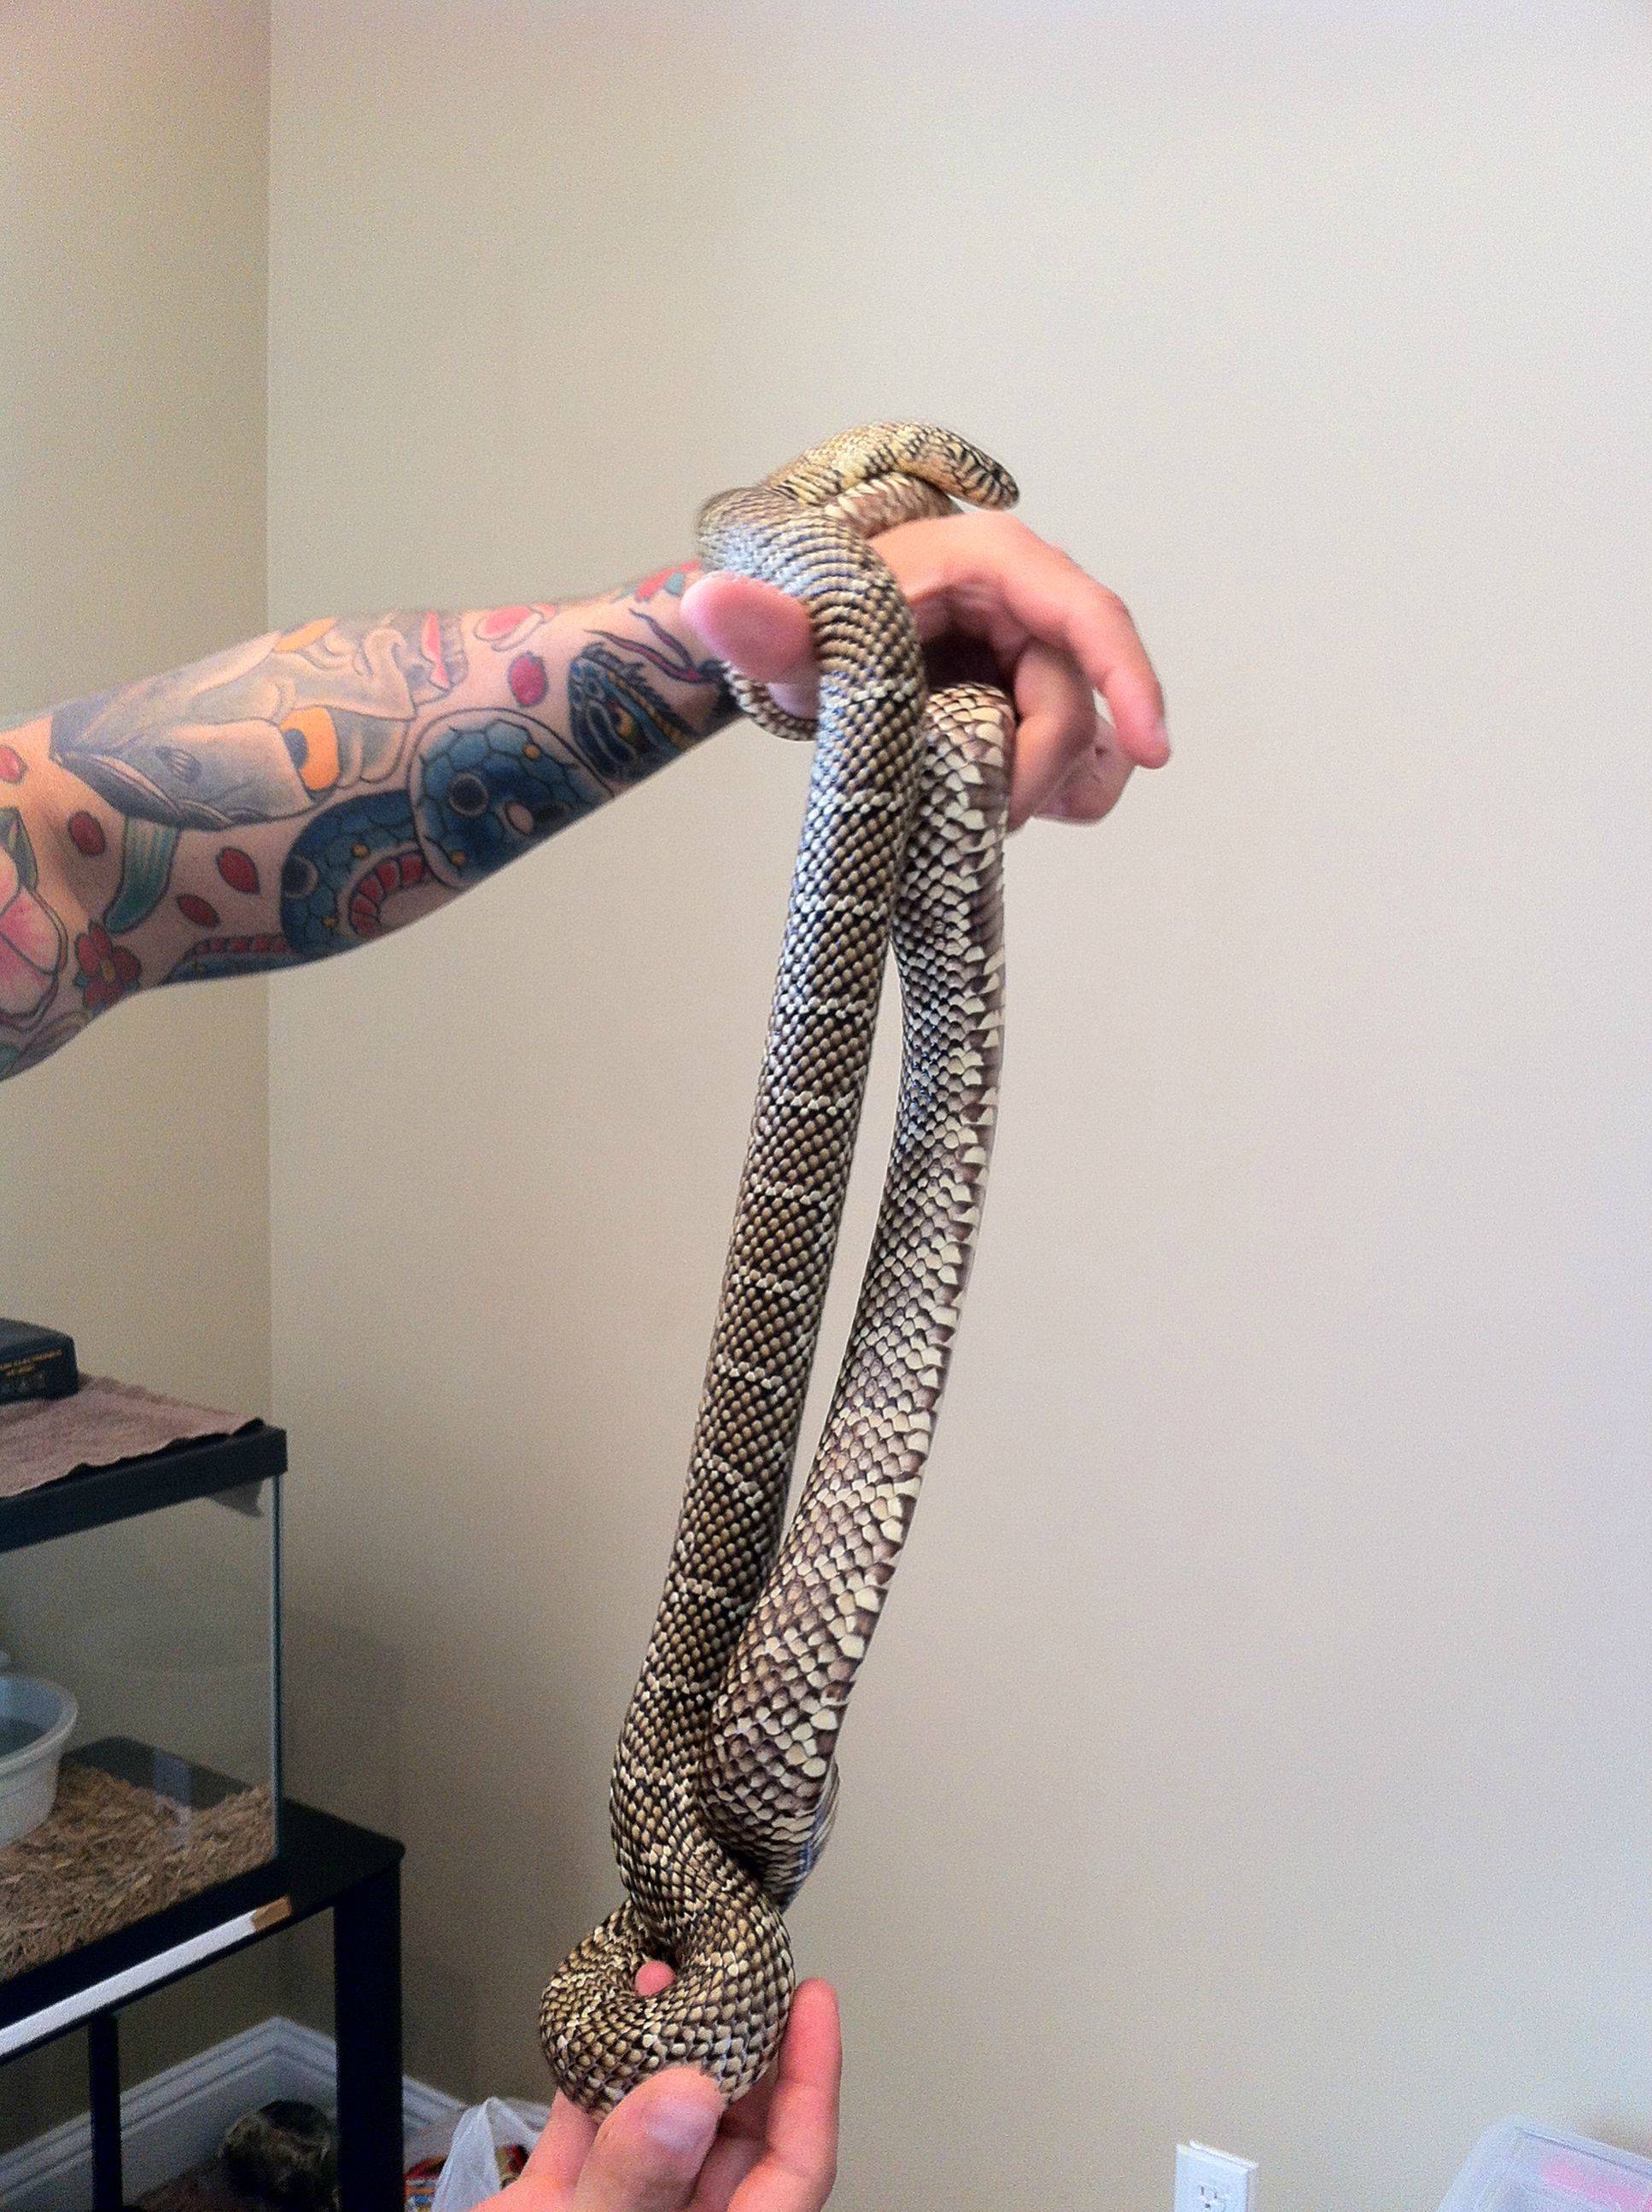 Can you identify my new kingsnake? Also, a temperature question.